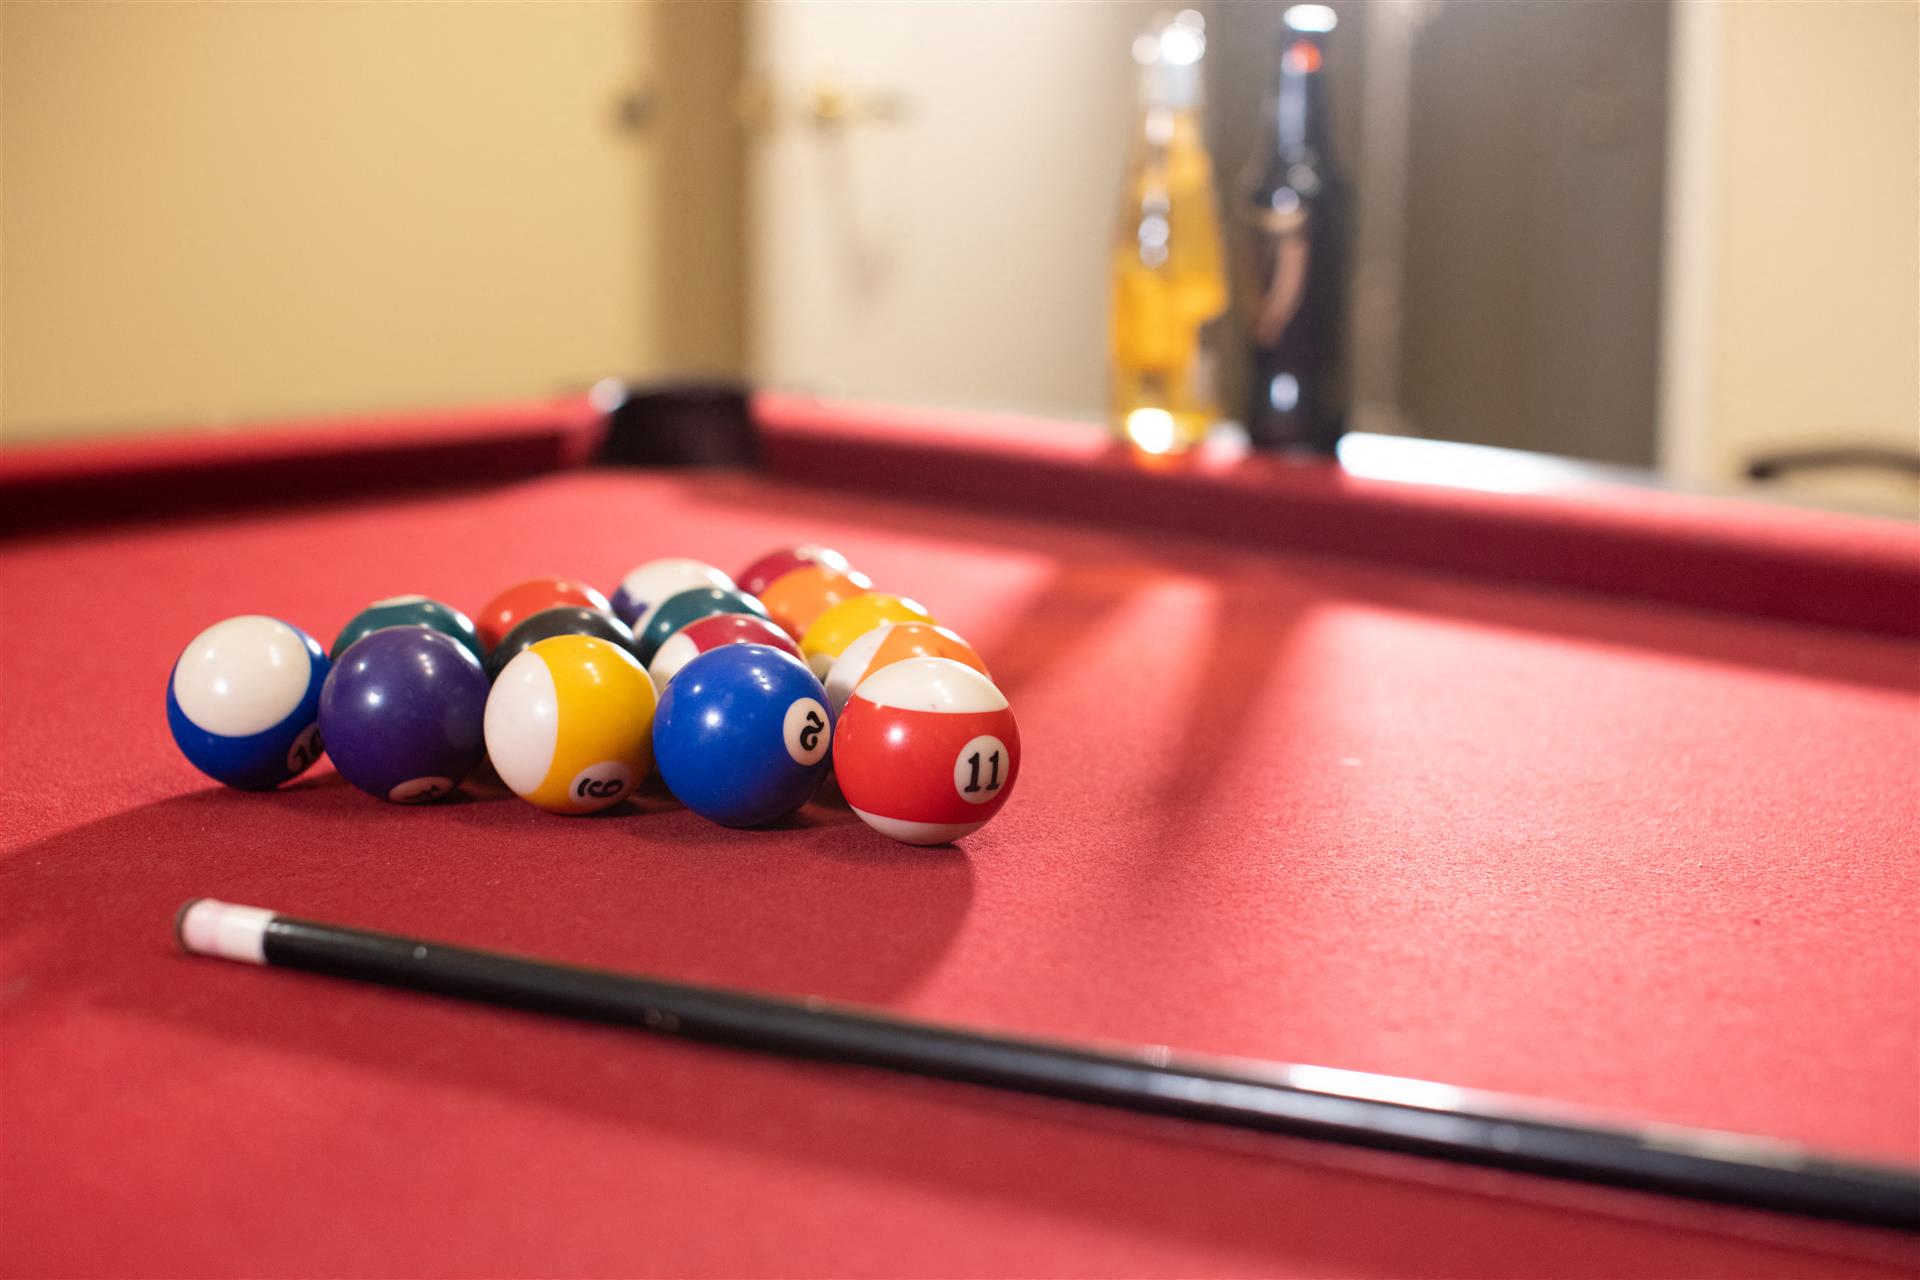 Choose from a variety of scheduled daily activities in our movie theatre, library, billiards and activity room. Join us for happy hour! Bus and van transportation is available, as well as excursions to special community events.